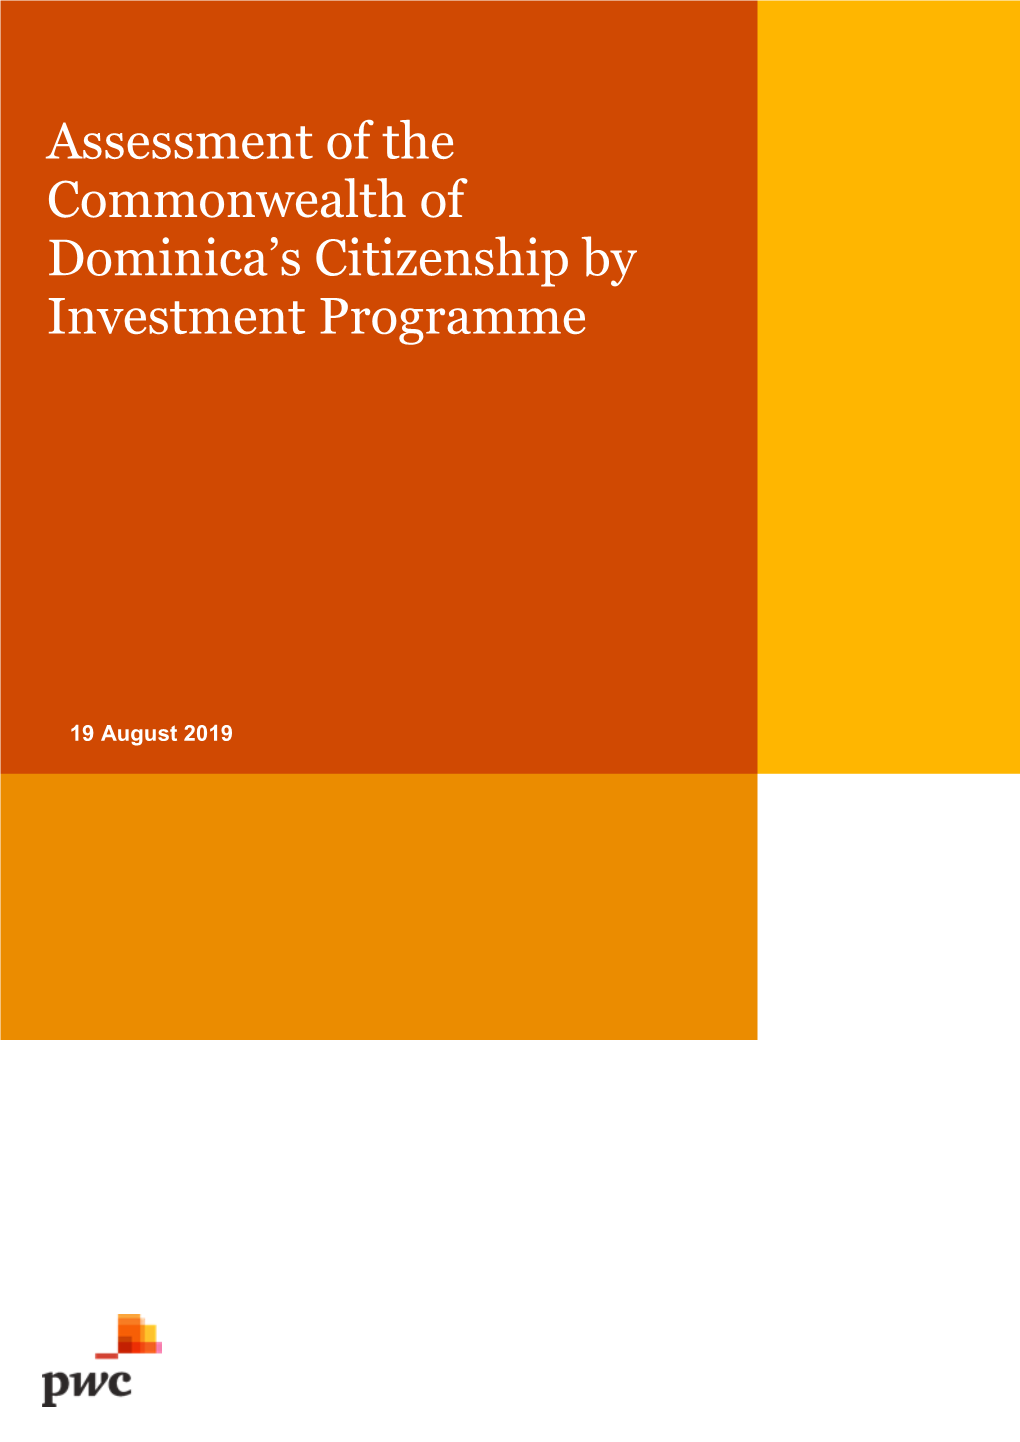 Assessment of the Commonwealth of Dominica's Citizenship By